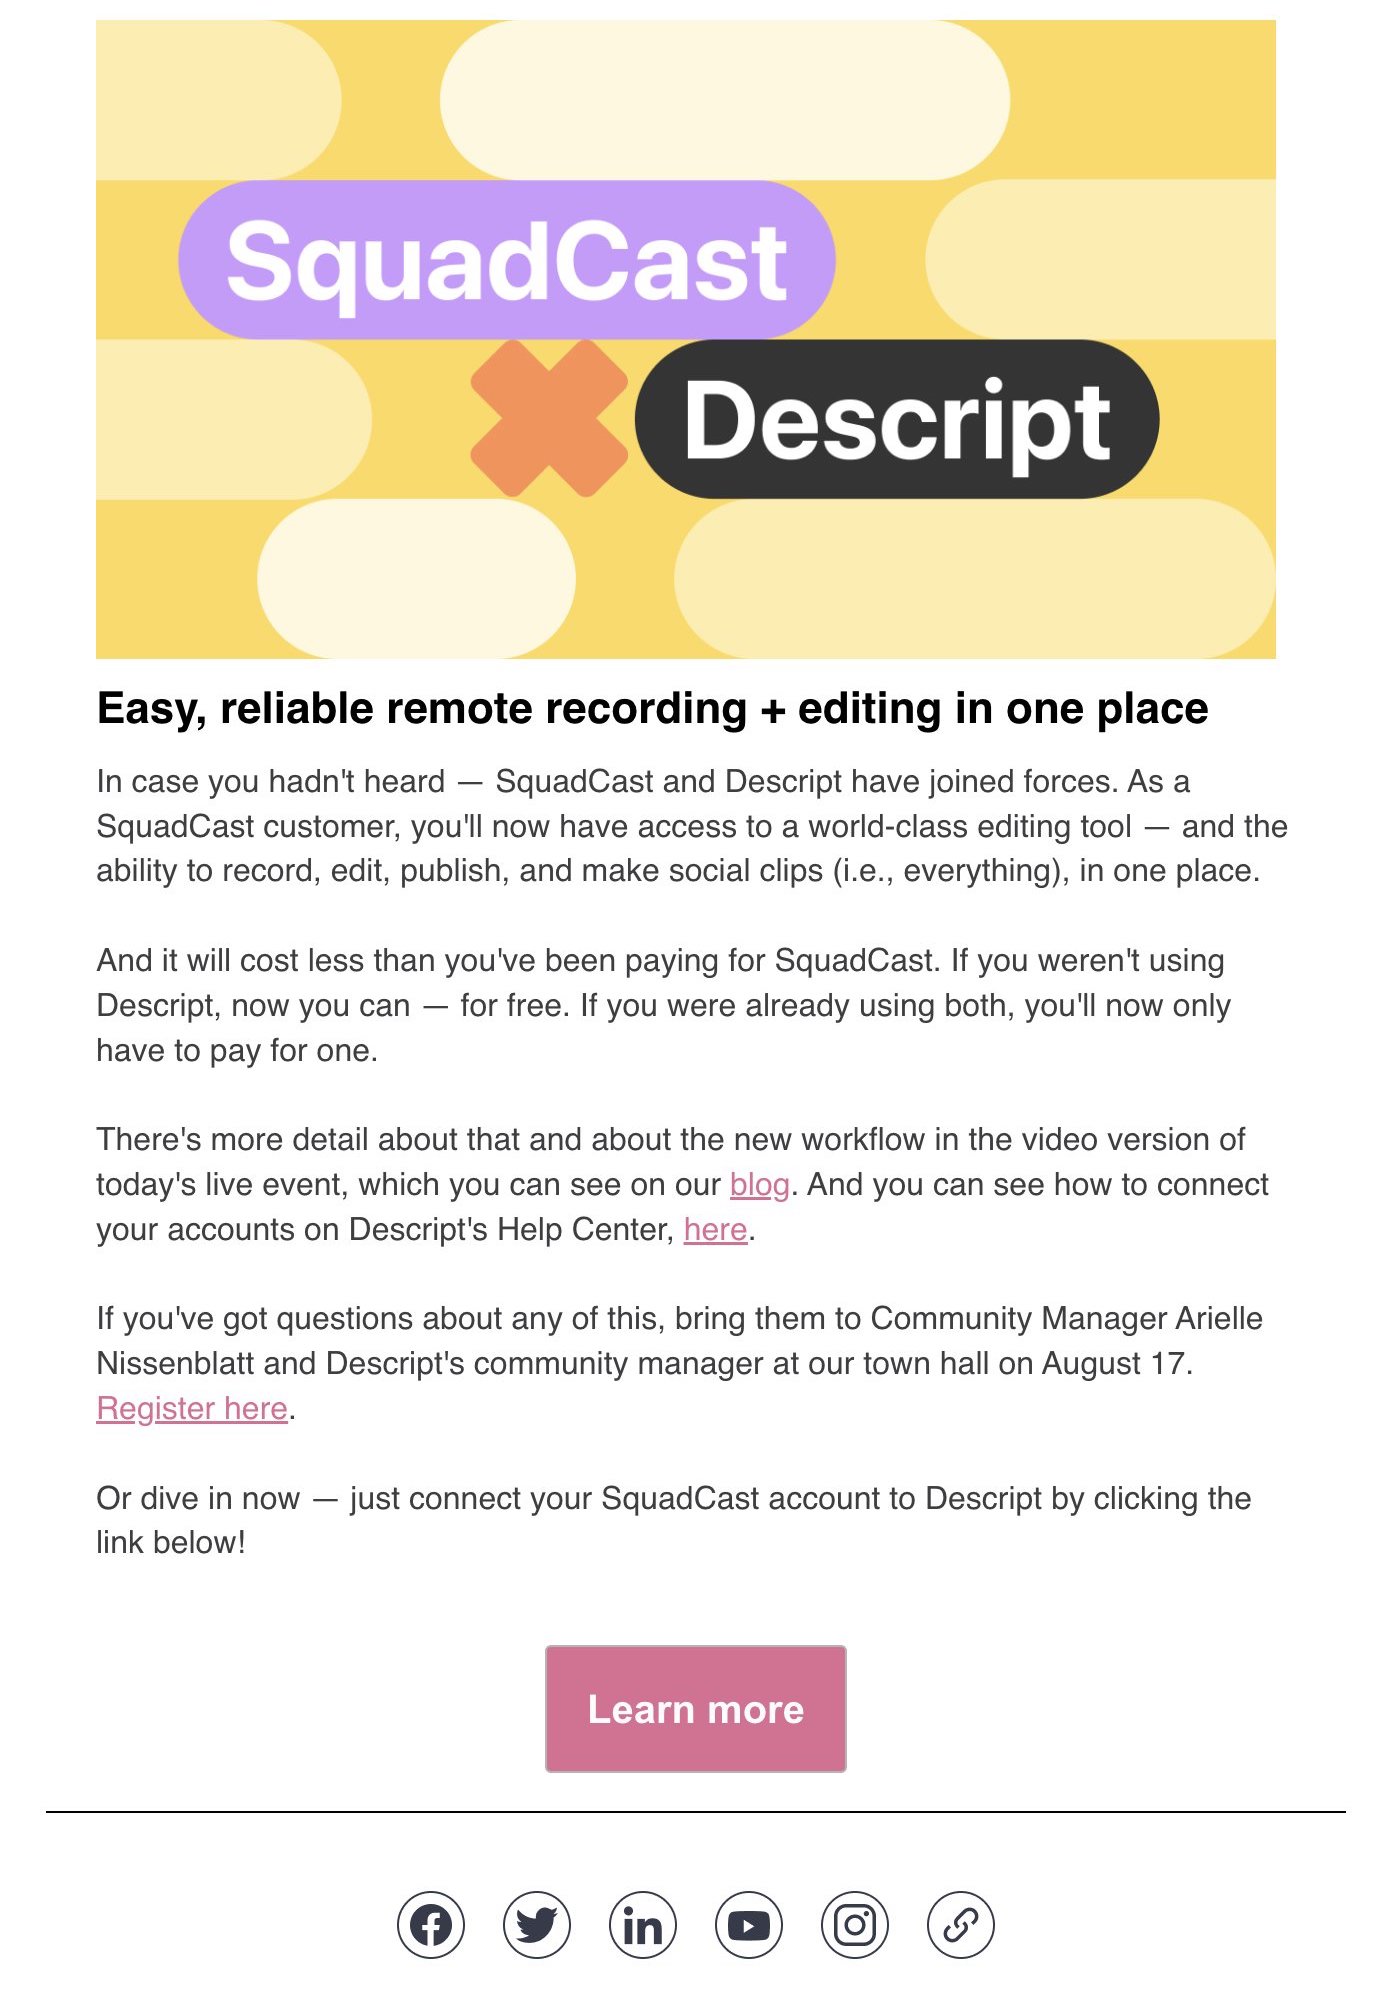 SaaS Company Acquisition Announcement Emails: Screenshot of SquadCast's announcement email when they got acquired by Descript